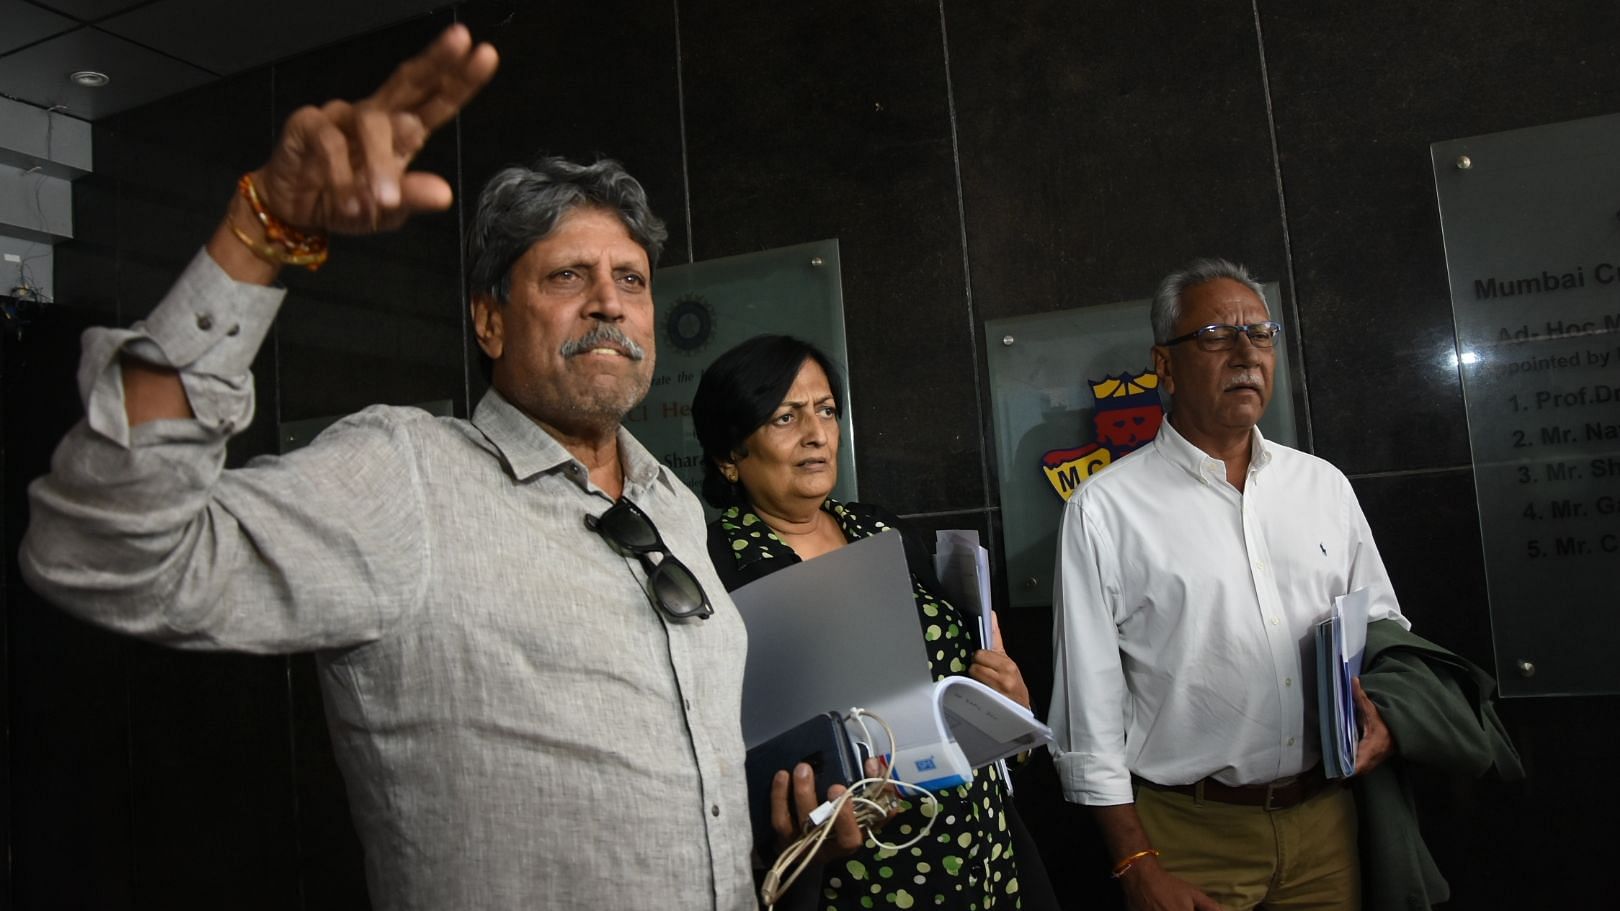 While Kapil Dev and Anshuman Gaekwad are aware of the meeting, third member Shantha Rangaswamy has revealed that she hasn’t been notified of any such meeting.